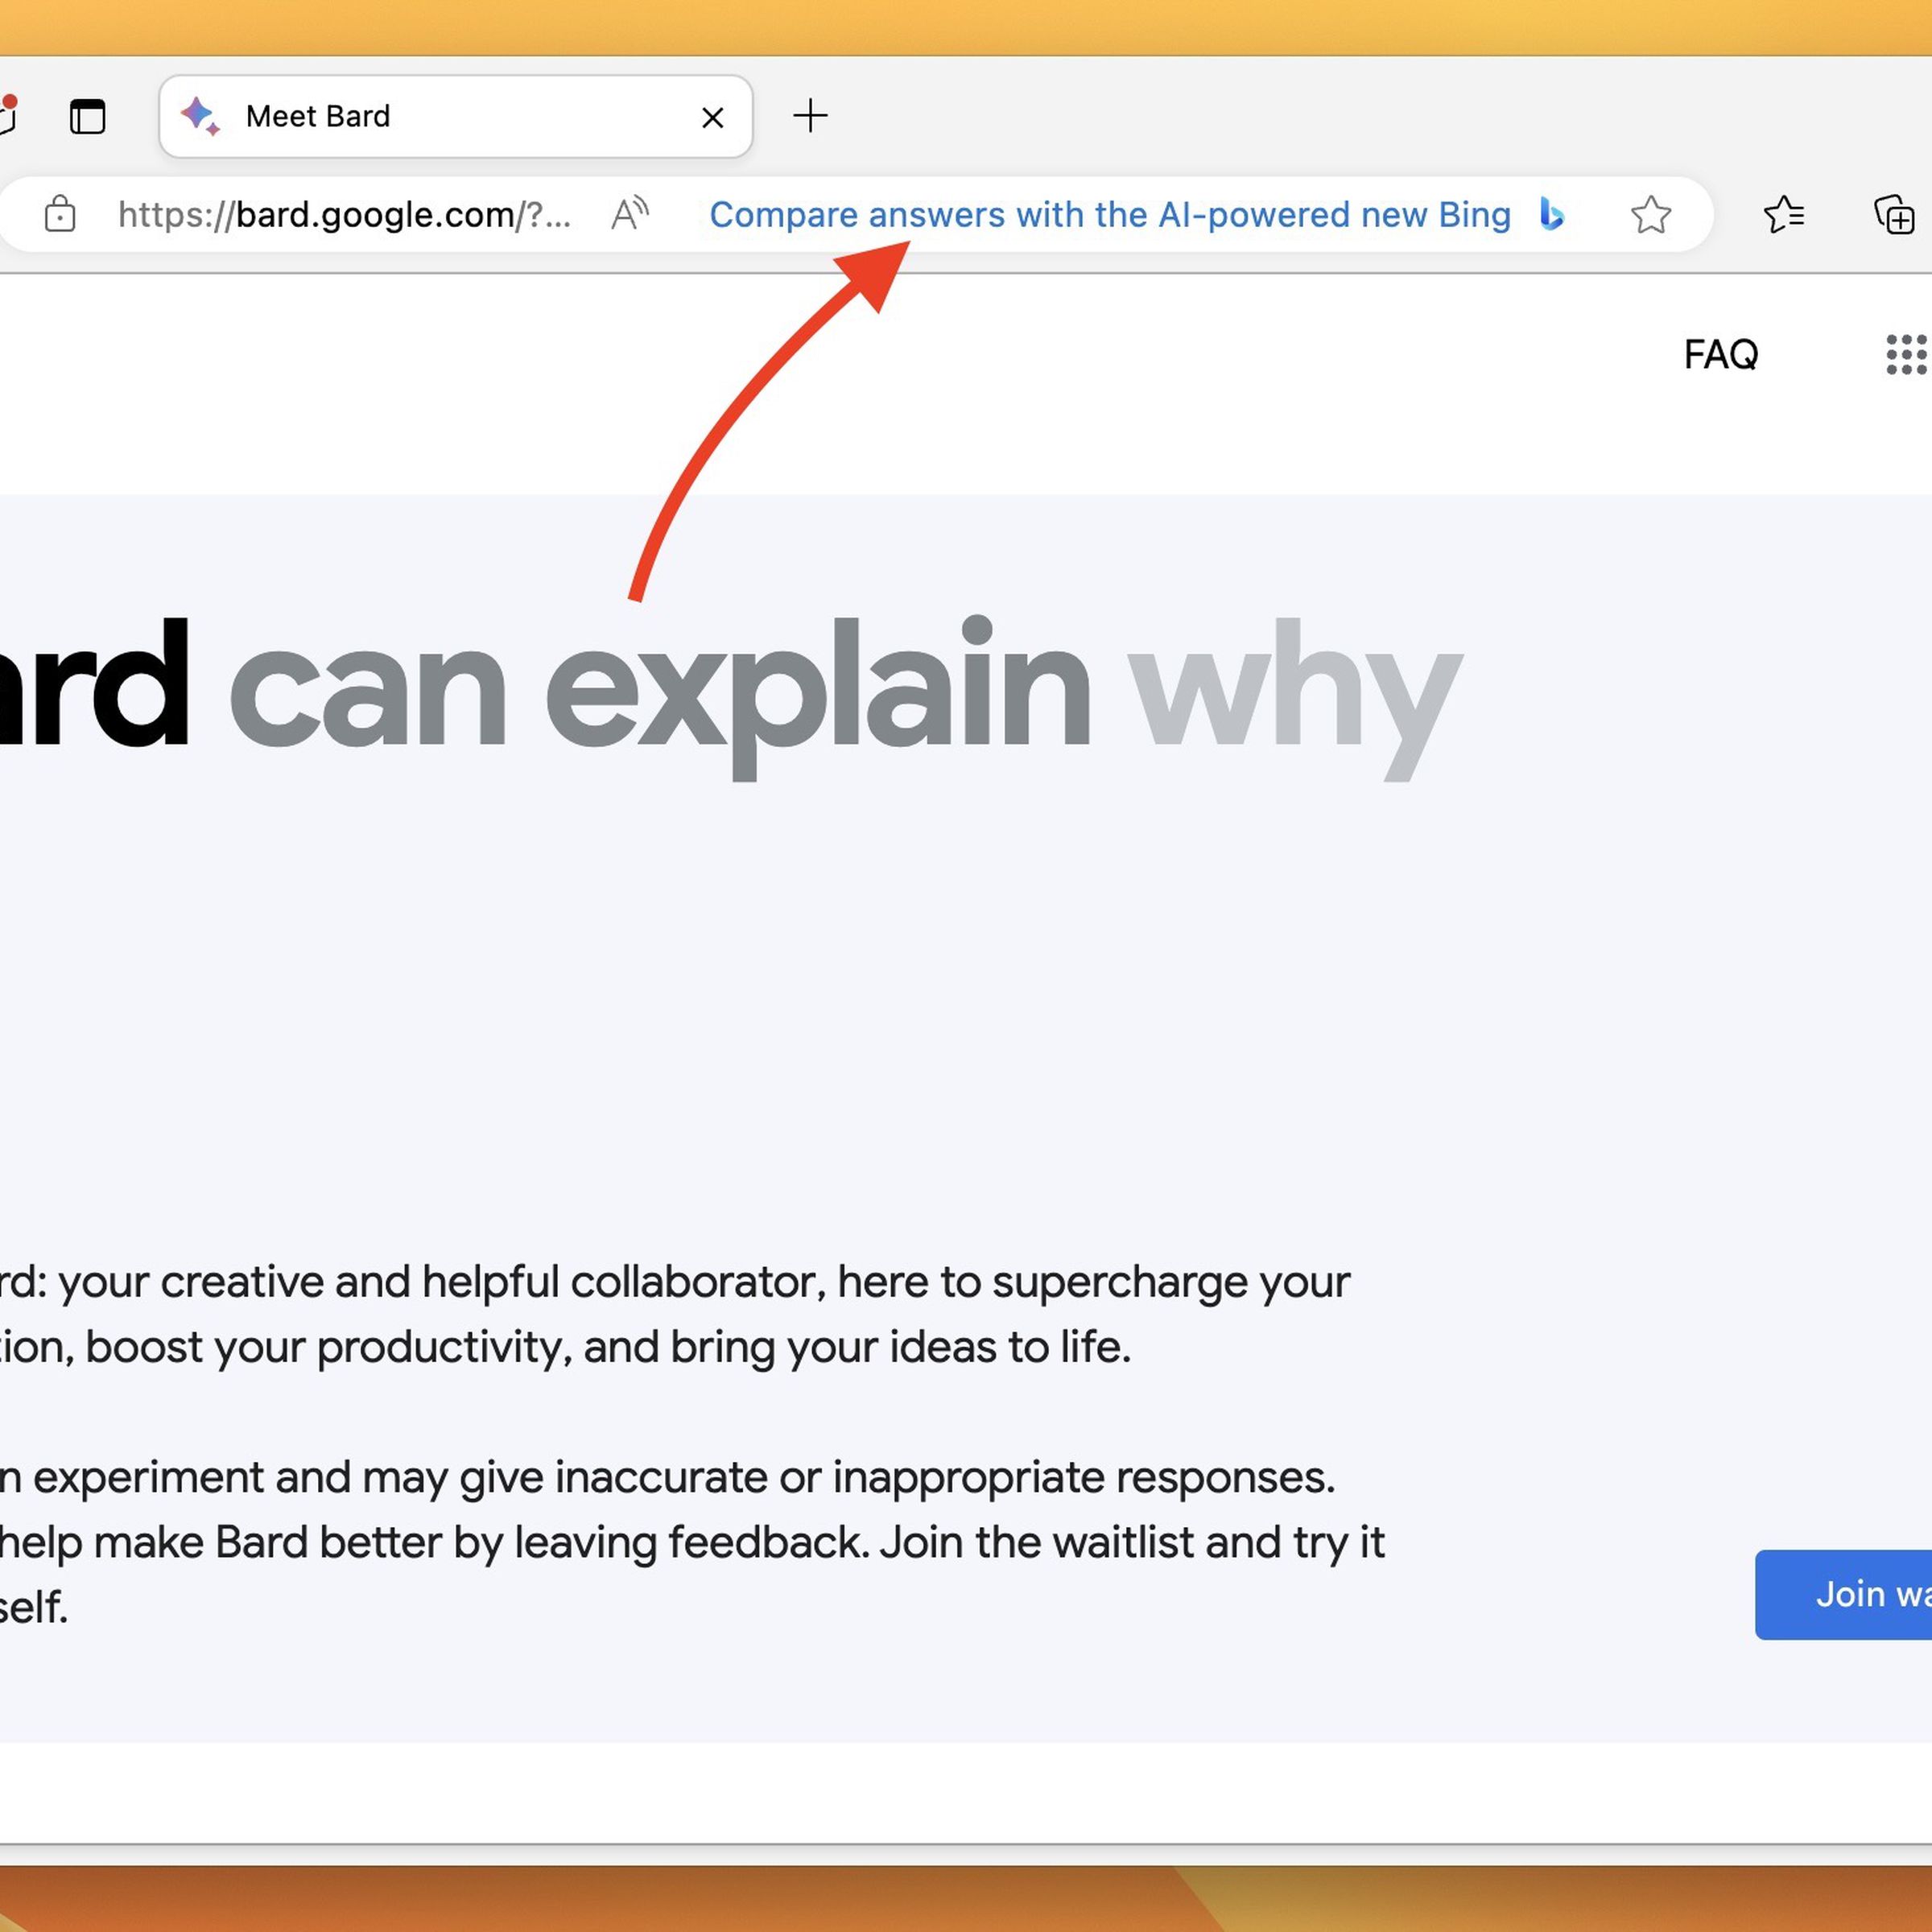 Window of Microsoft Edge developer on macOS with a red arrow pointing to the Bing AI advertisement while on Google’s Bard site.